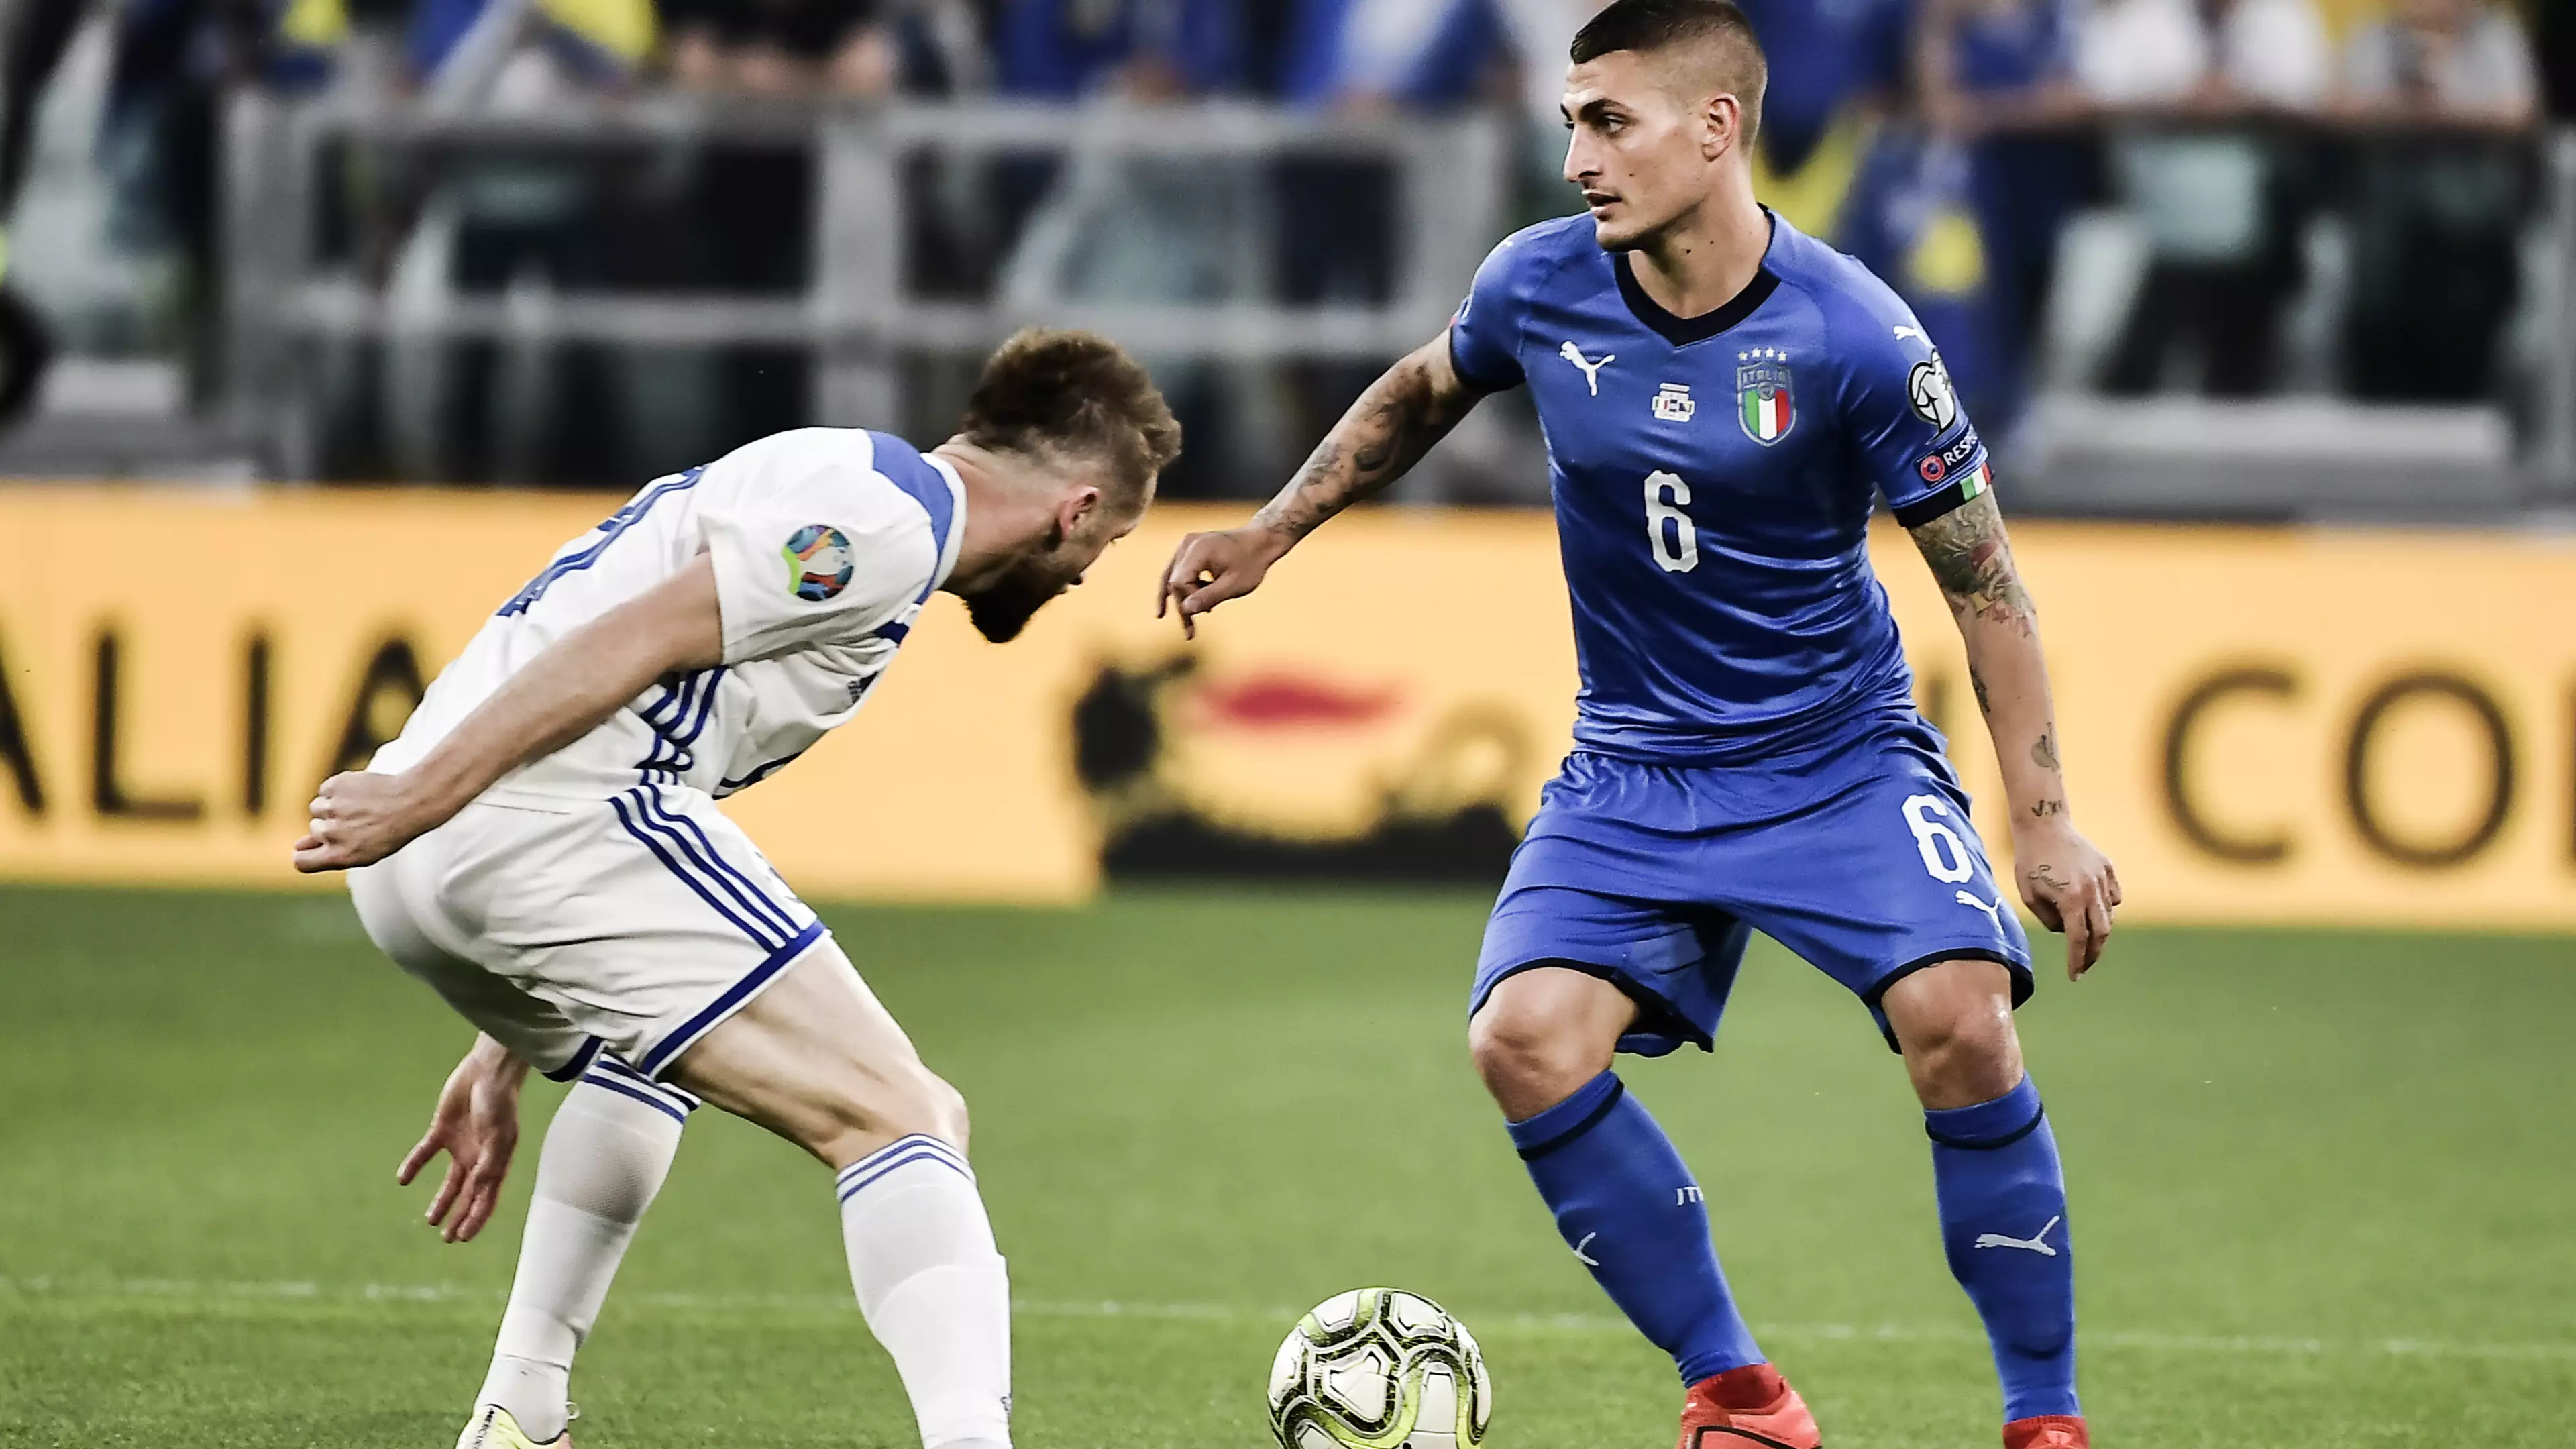 Bosnia Vs Italy: LIVE Stream And TV Channel Info For Euro 2020 Qualifier